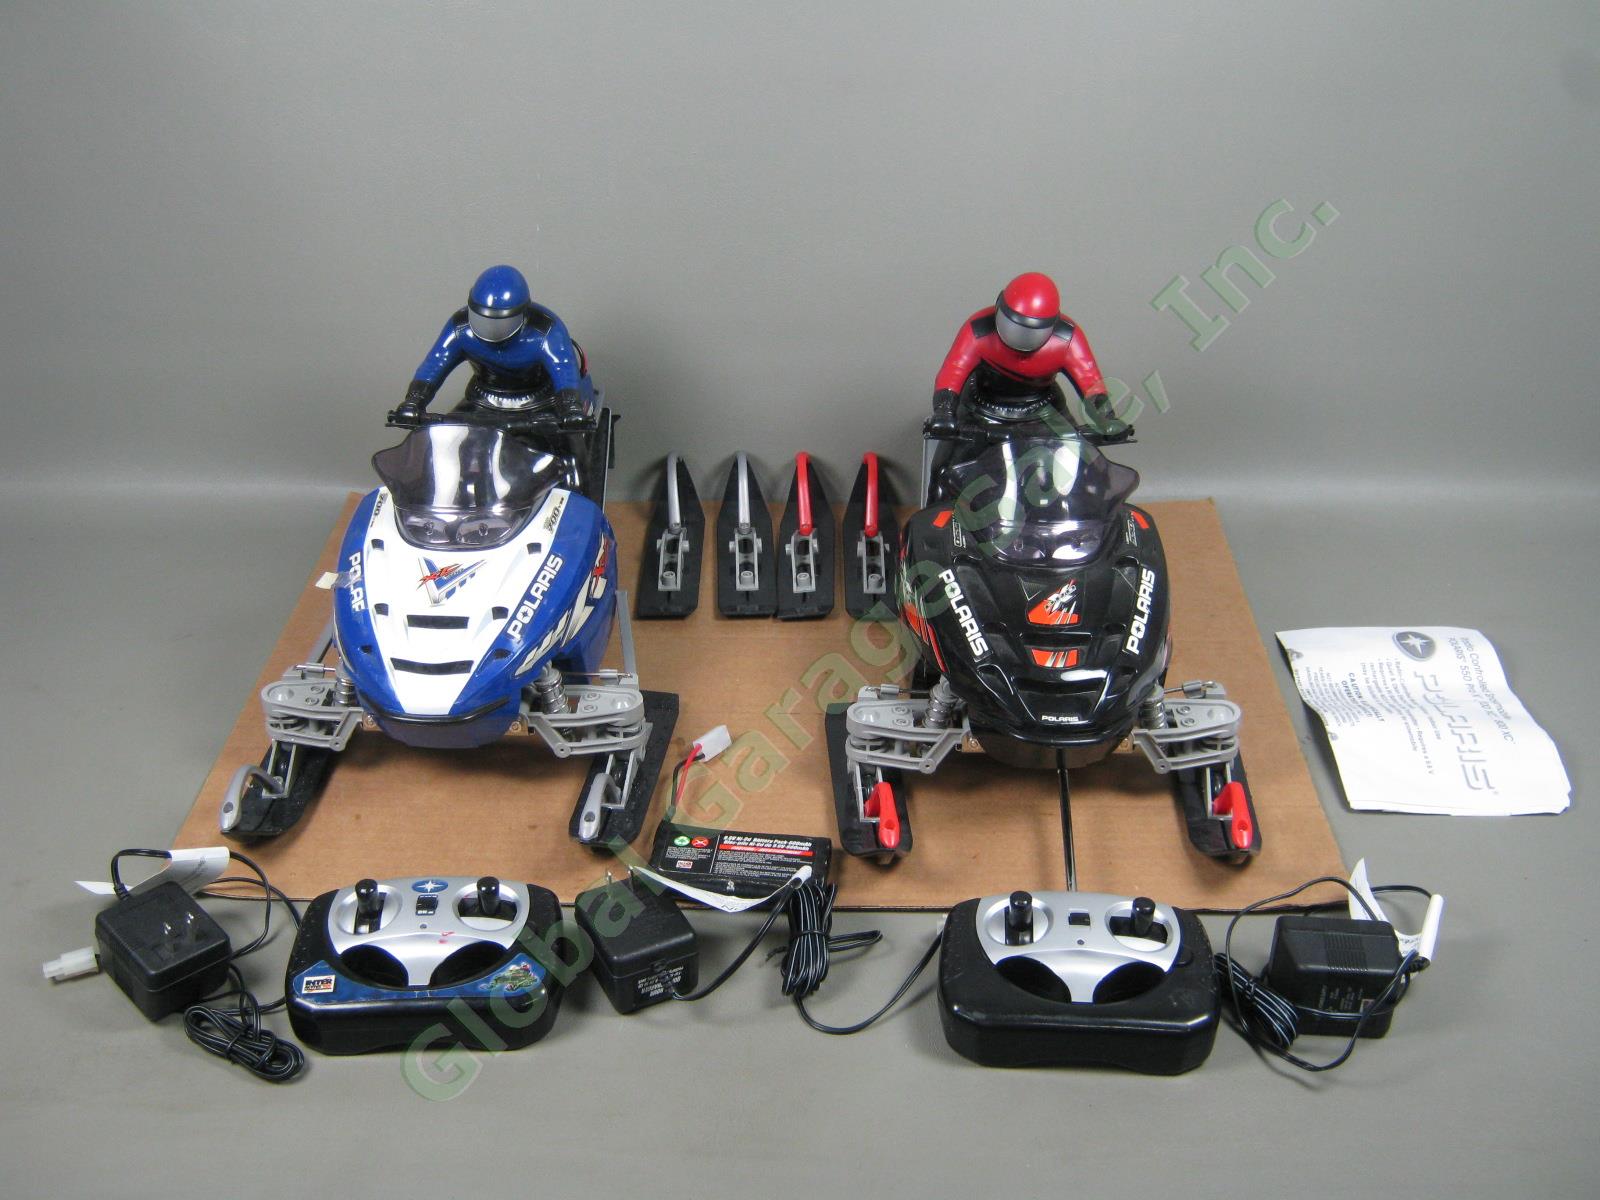 2 Polaris RC Remote Control Snowmobile Lot Liberty 550 Pro X 700 XC Tested As-Is